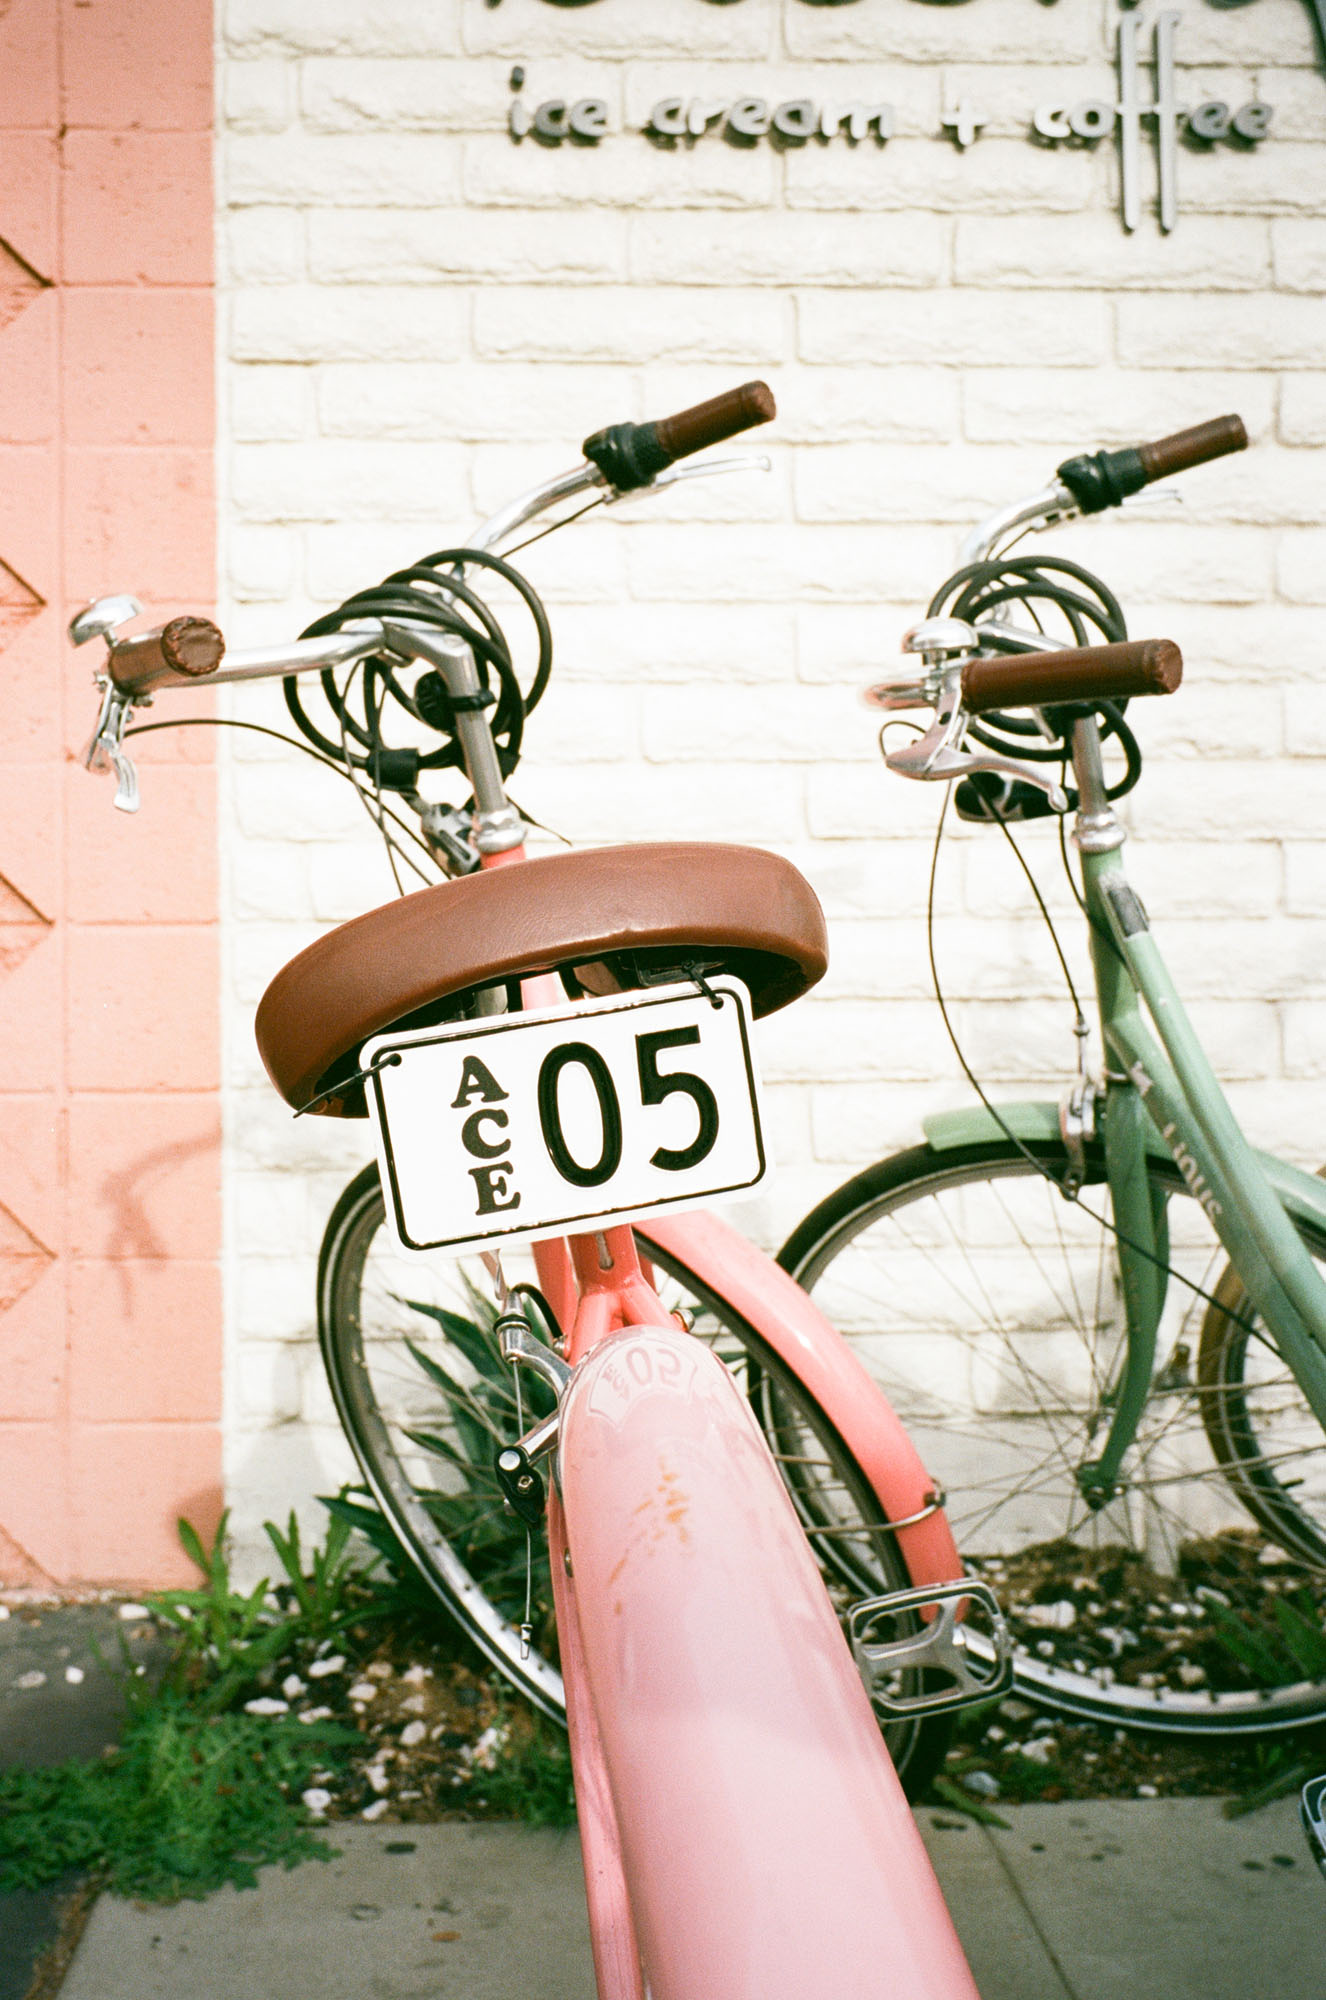 ace-hotel-bikes-palm-springs-california-film-photography